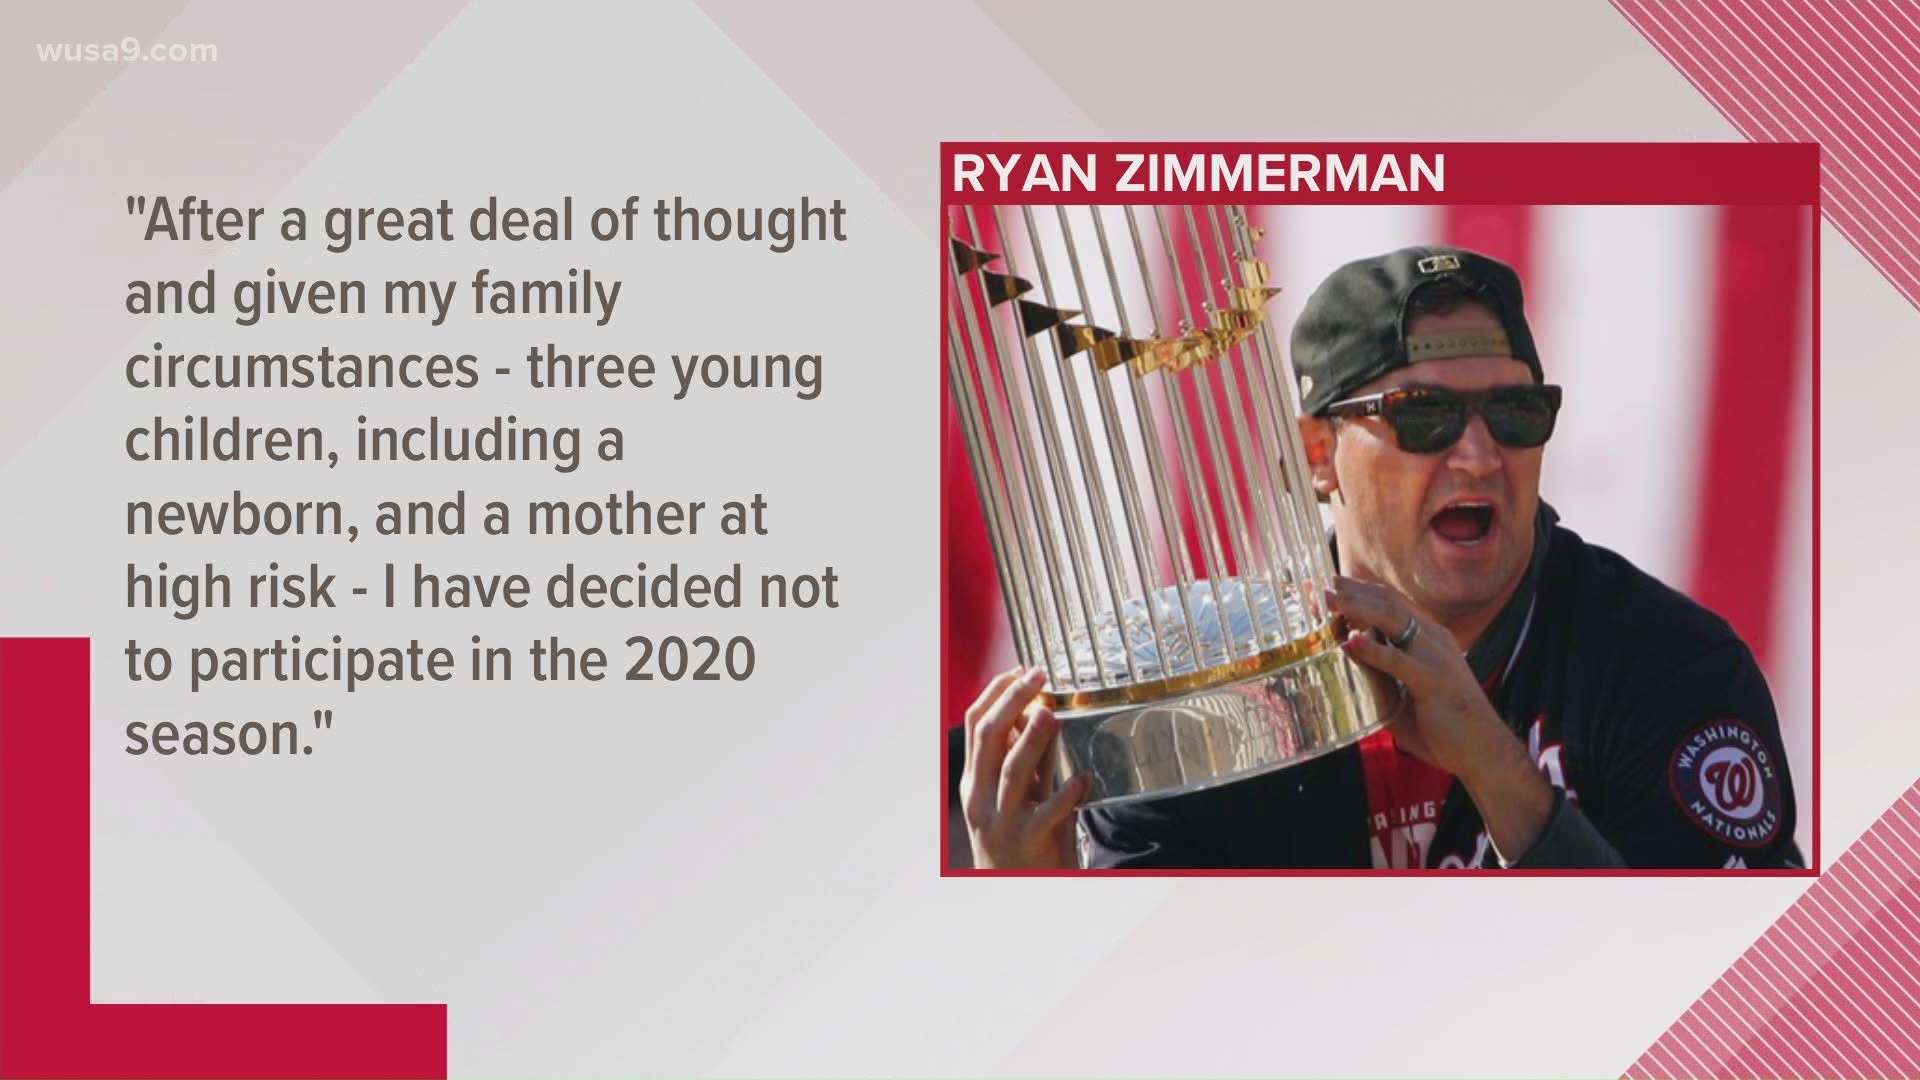 Washington National's Ryan Zimmerman says he has decided not to play in the 2020 MLB season to protect his family who are at high risk of getting the coronavirus.